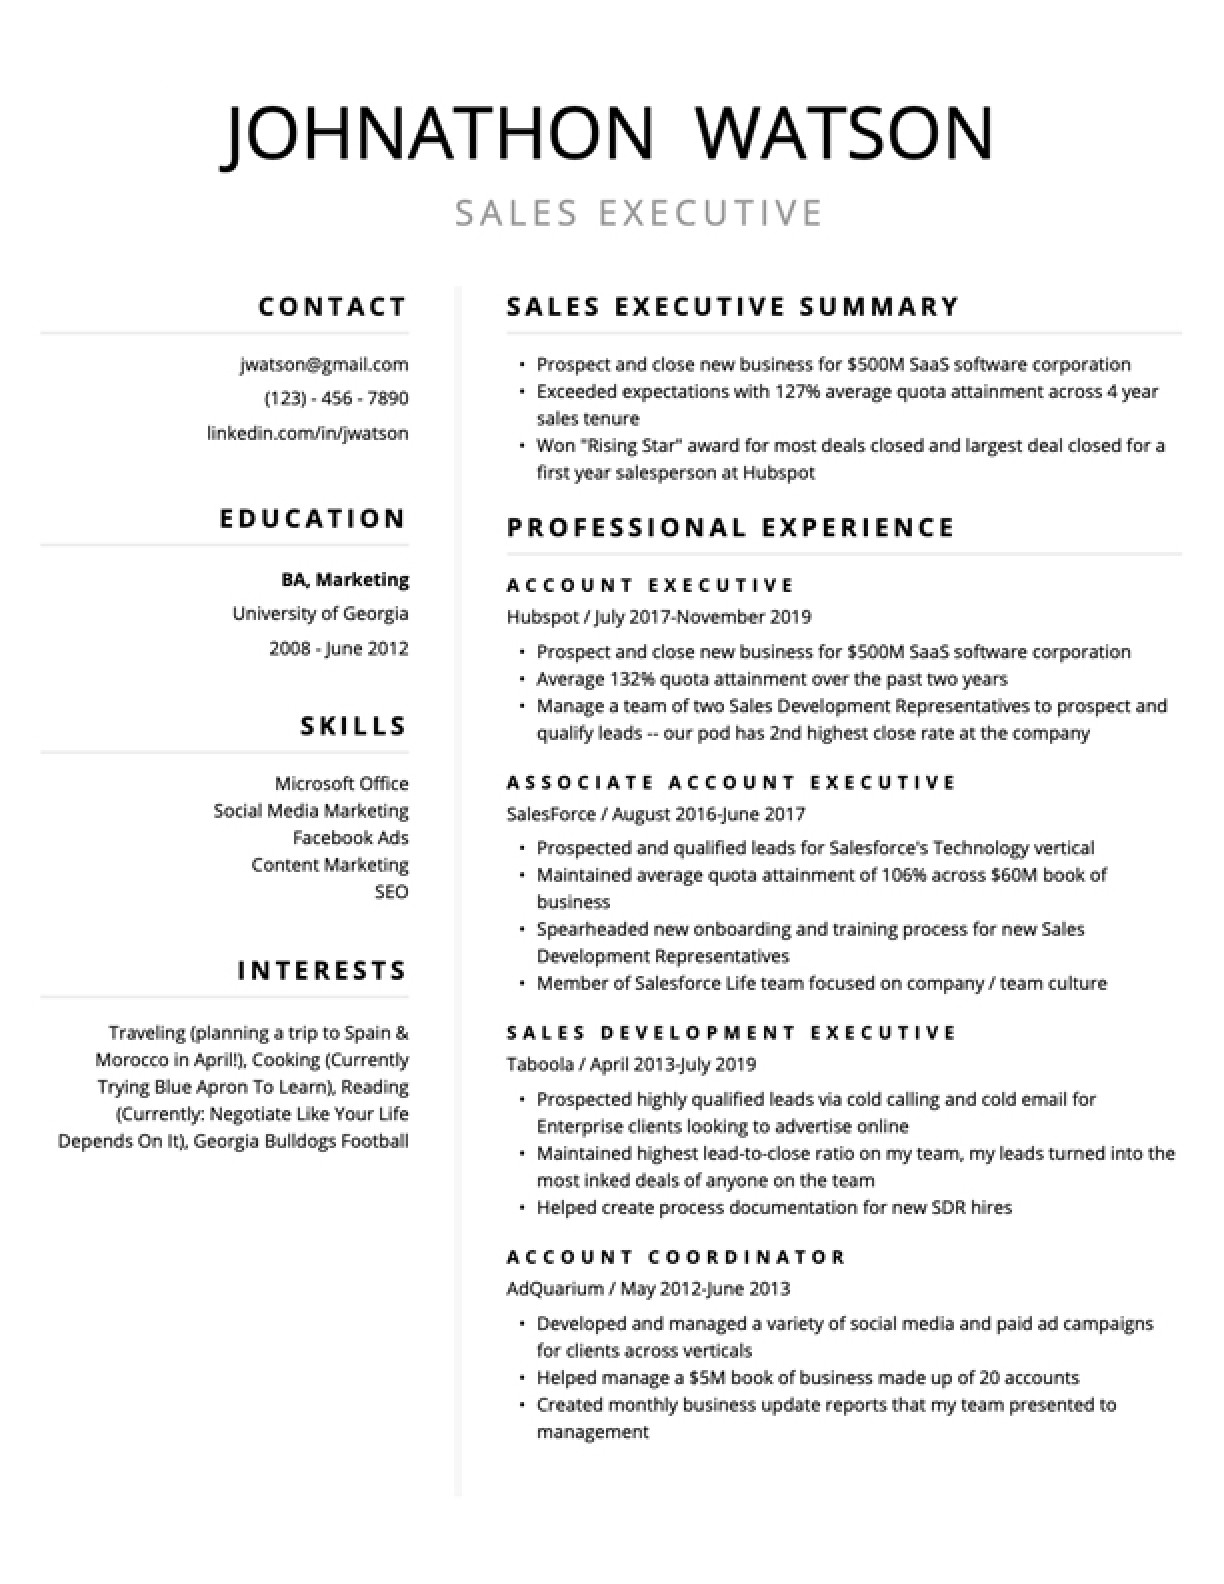 Free Resume Templates without Signing Up Free Resume Templates for 2021 (edit & Download) Resybuild.io